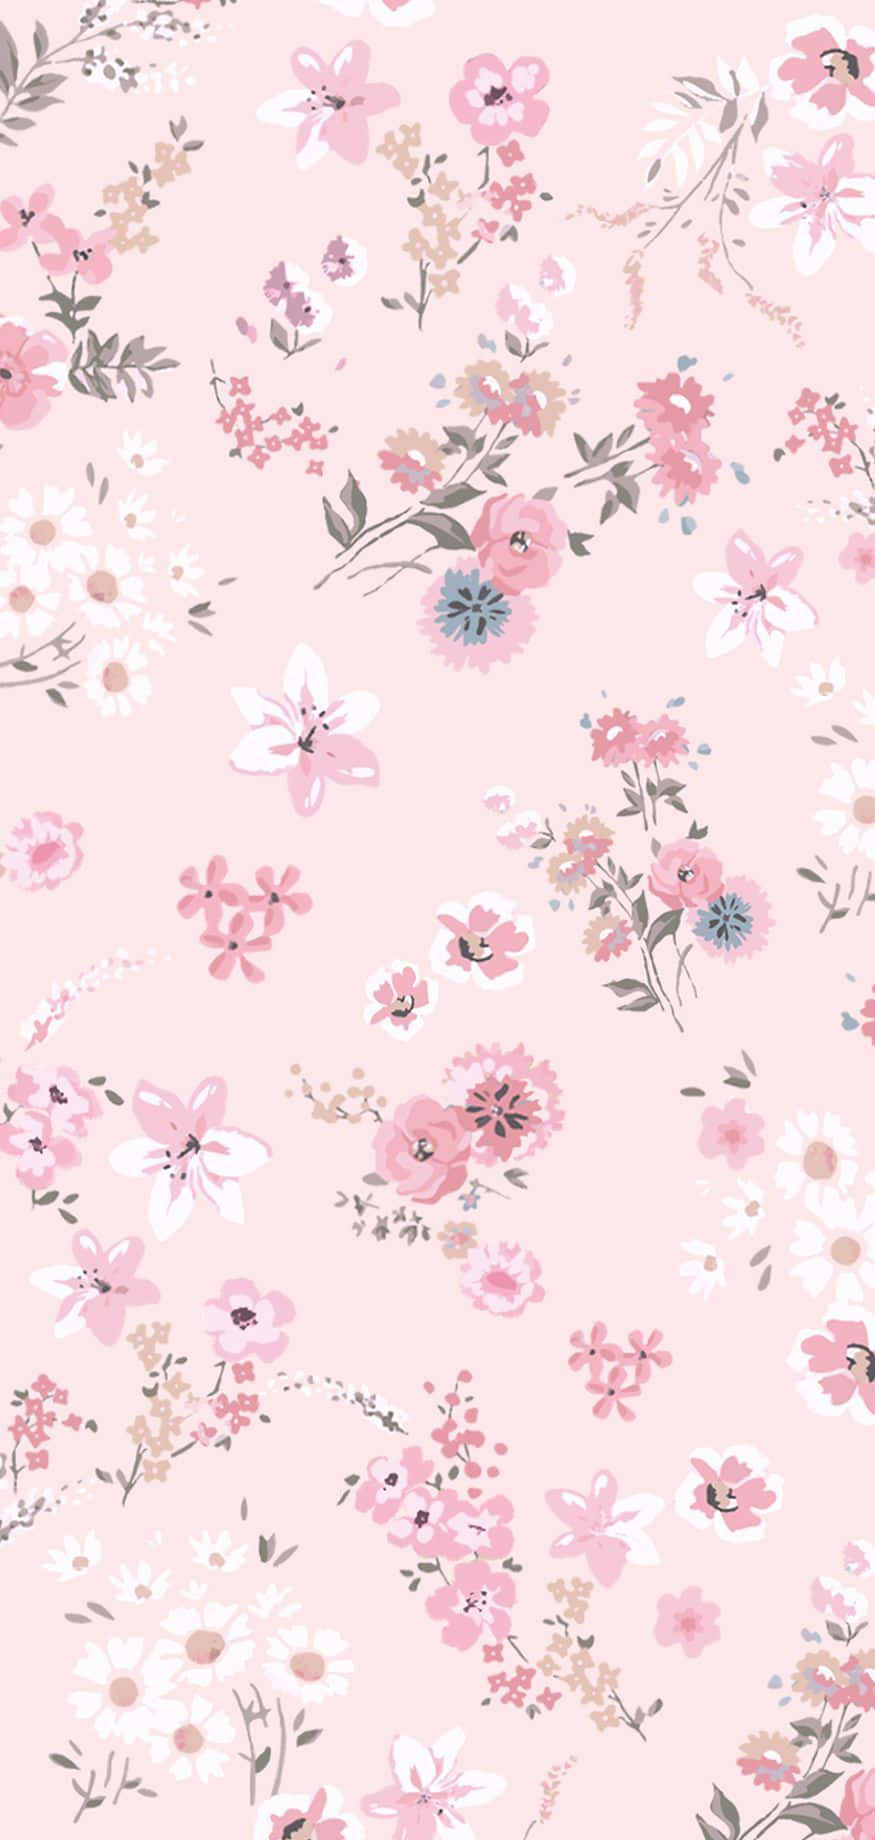 100+] Cute Iphone Flower Wallpapers | Wallpapers.com